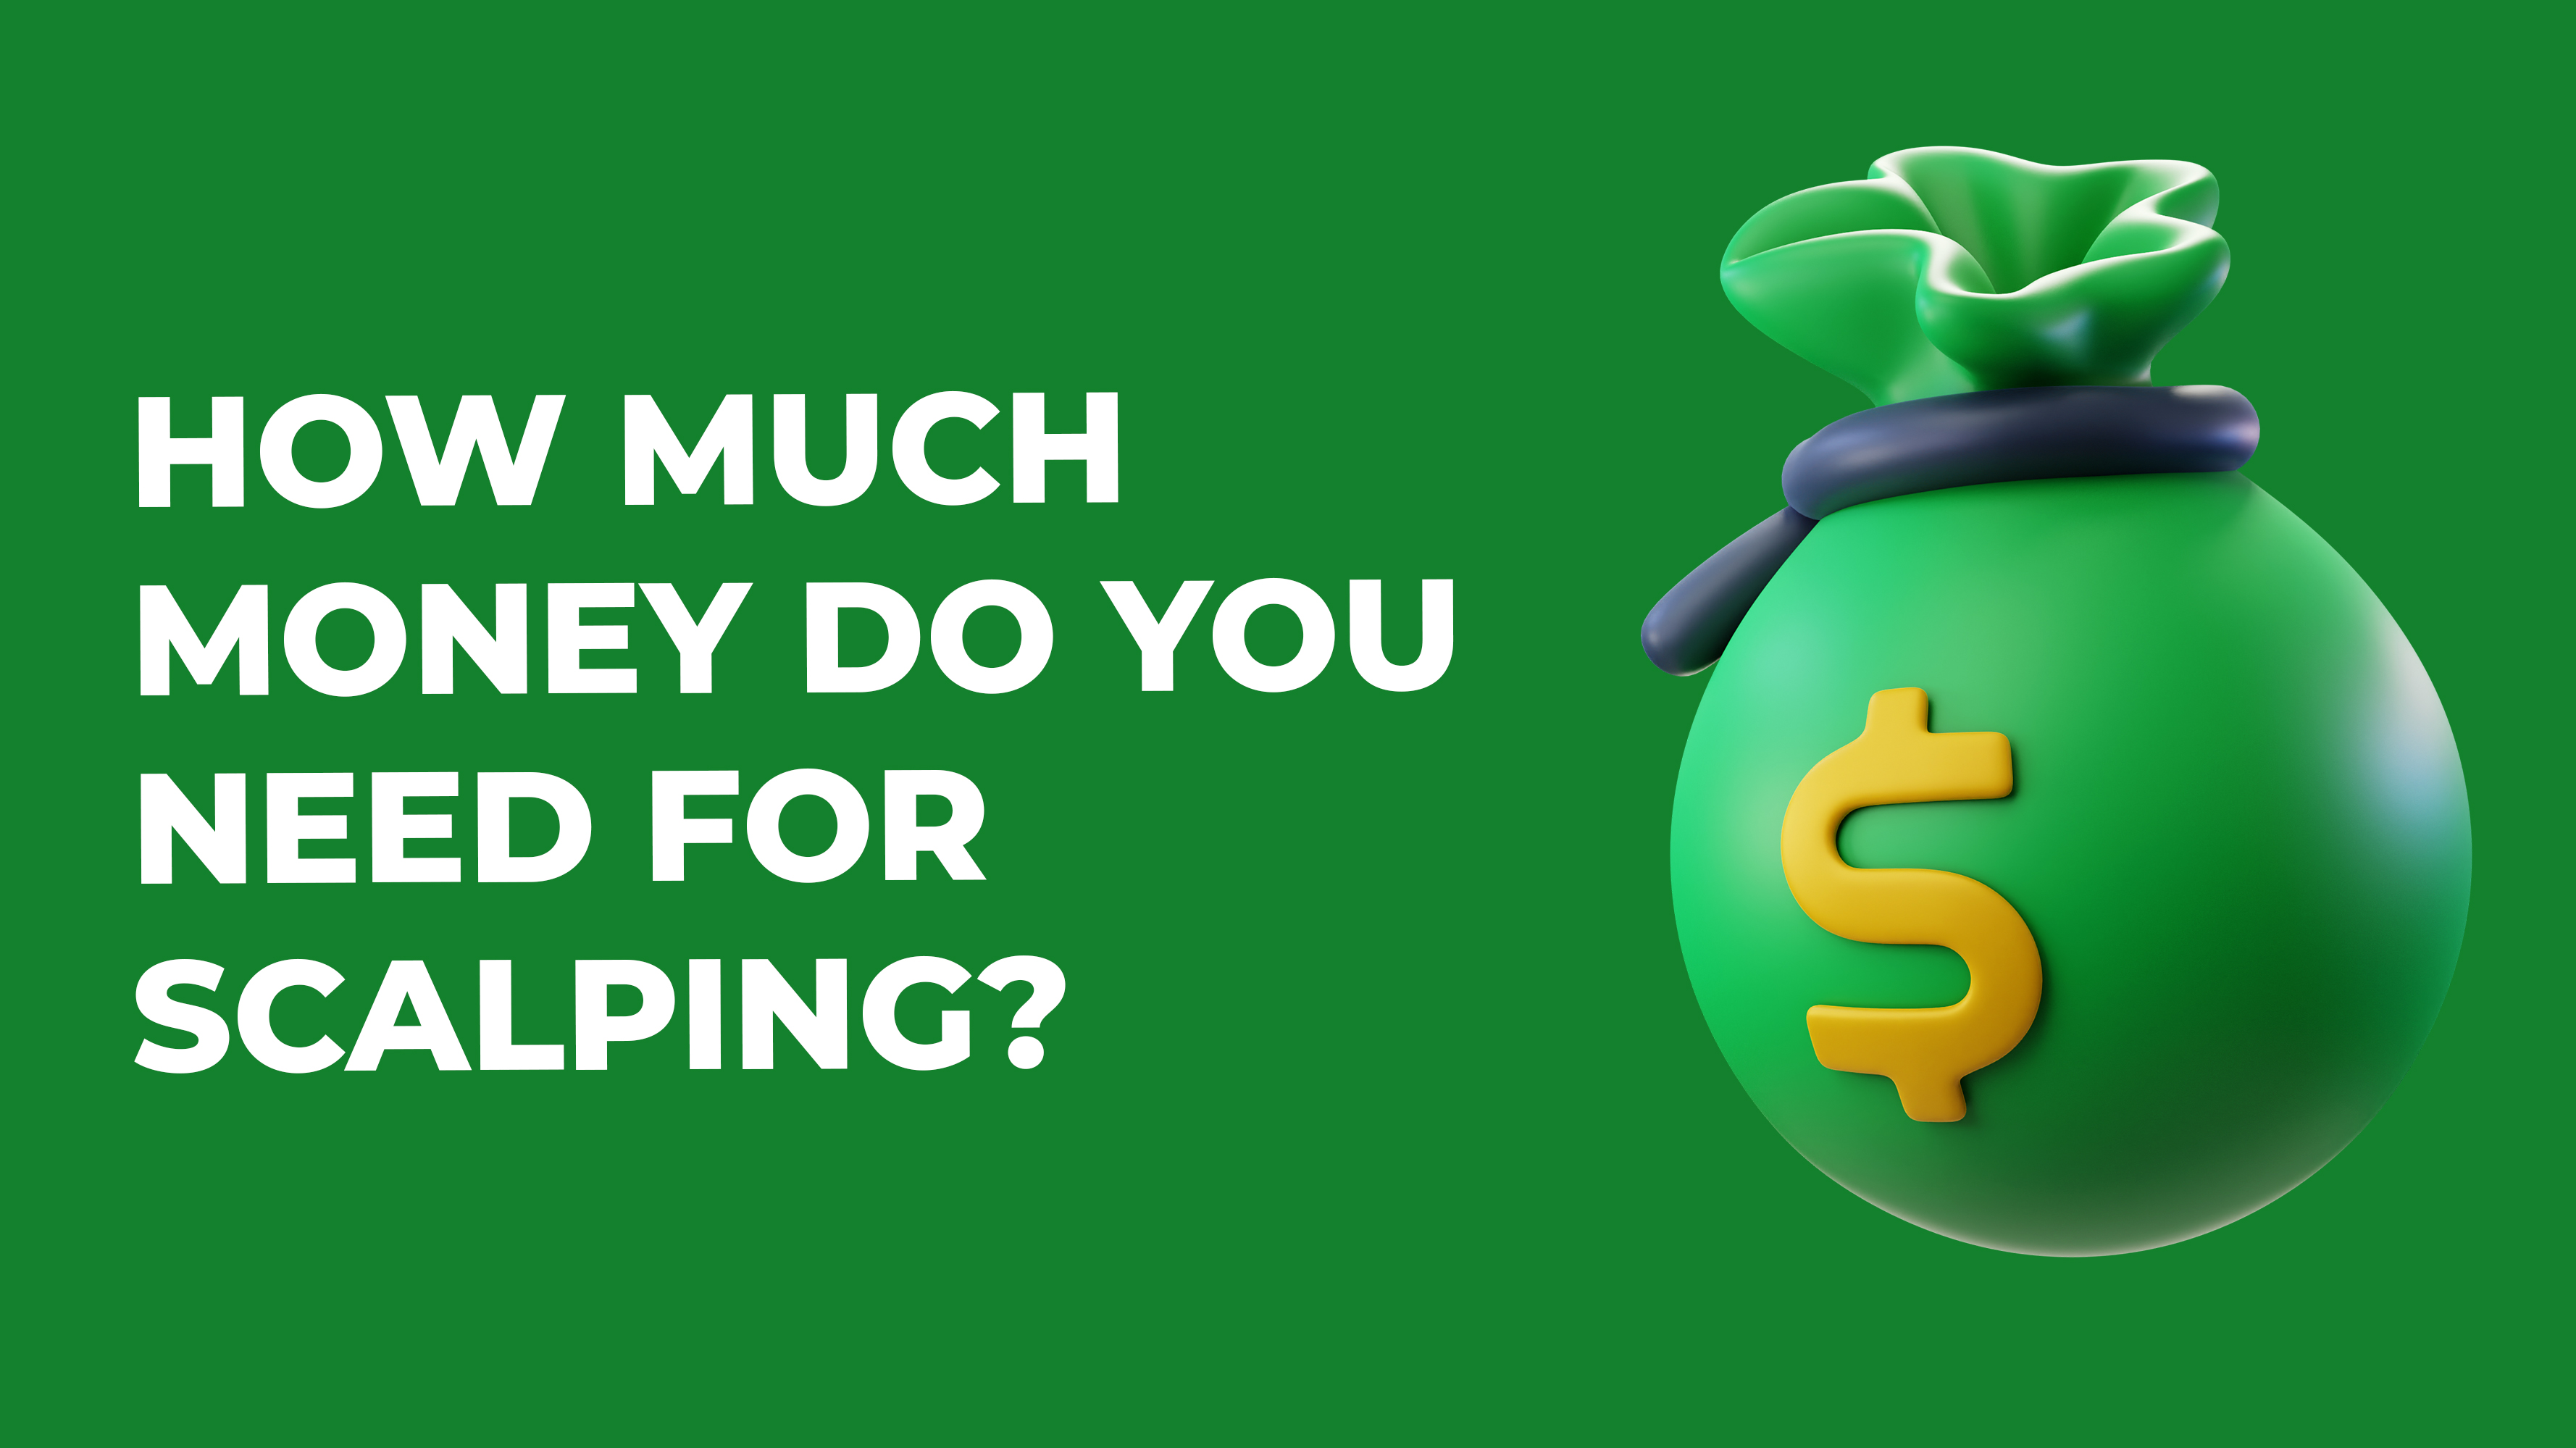 How much money do you need for scalping?